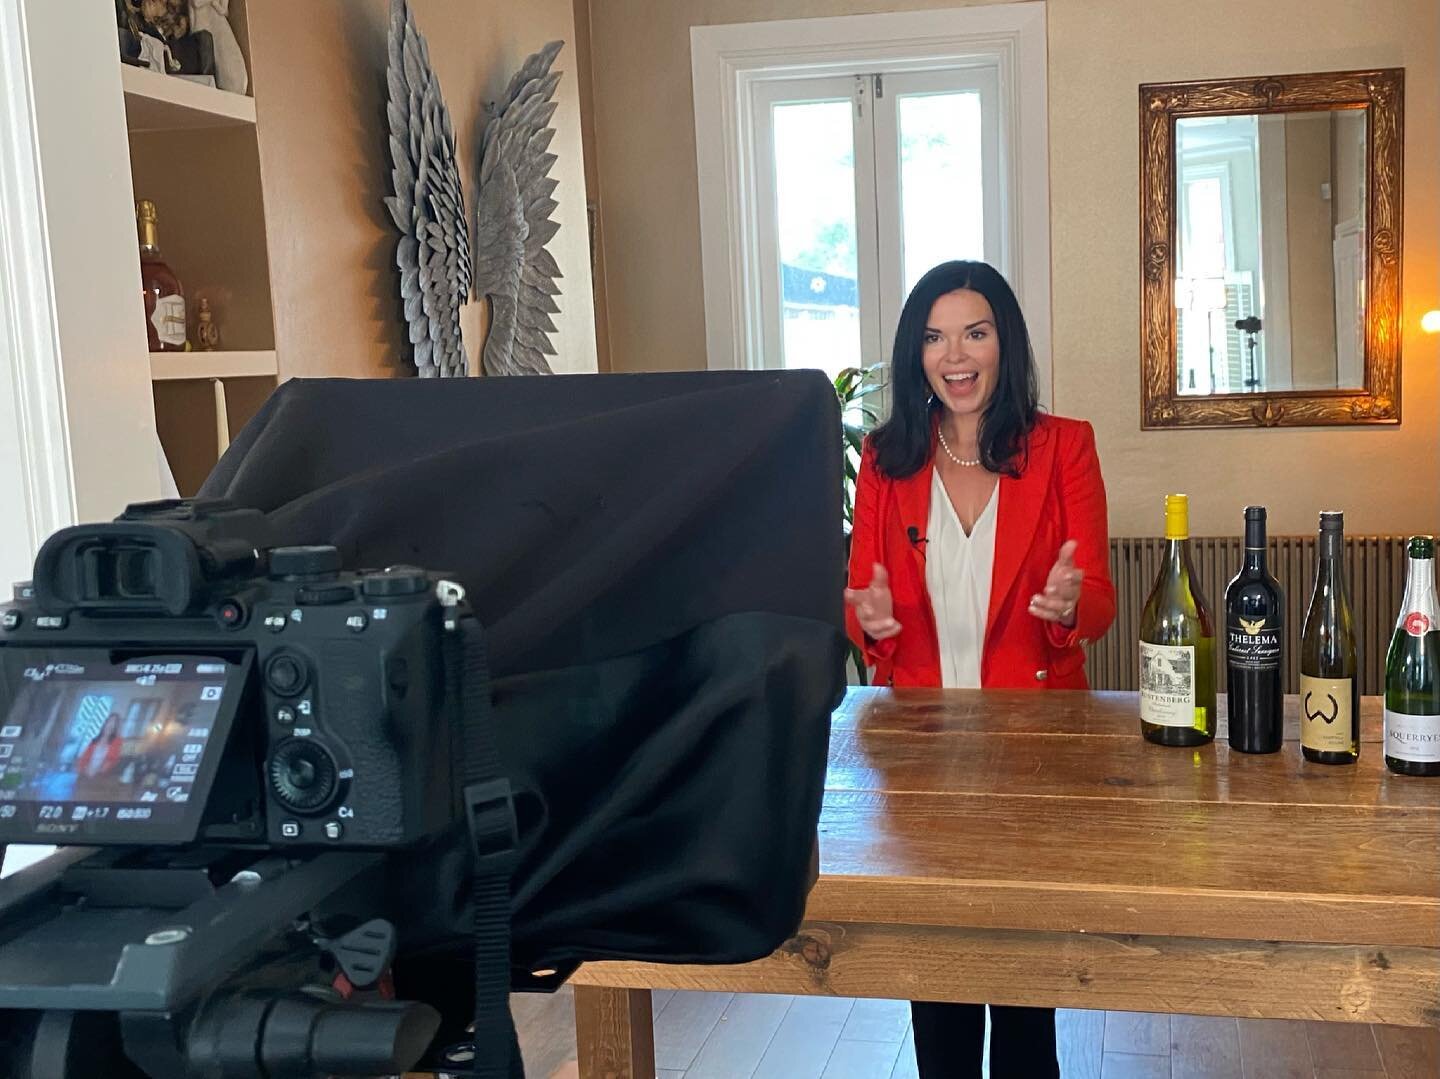 🍾 As you can see, I&rsquo;m incredibly excited to be shooting today with the very patient (and precise) @stoppressfilm on a new &ldquo;how to&rdquo; course we&rsquo;ve designed with @bright.trip on #vineyard tours and #winetasting 🥂

👉🏻 Swipe to 